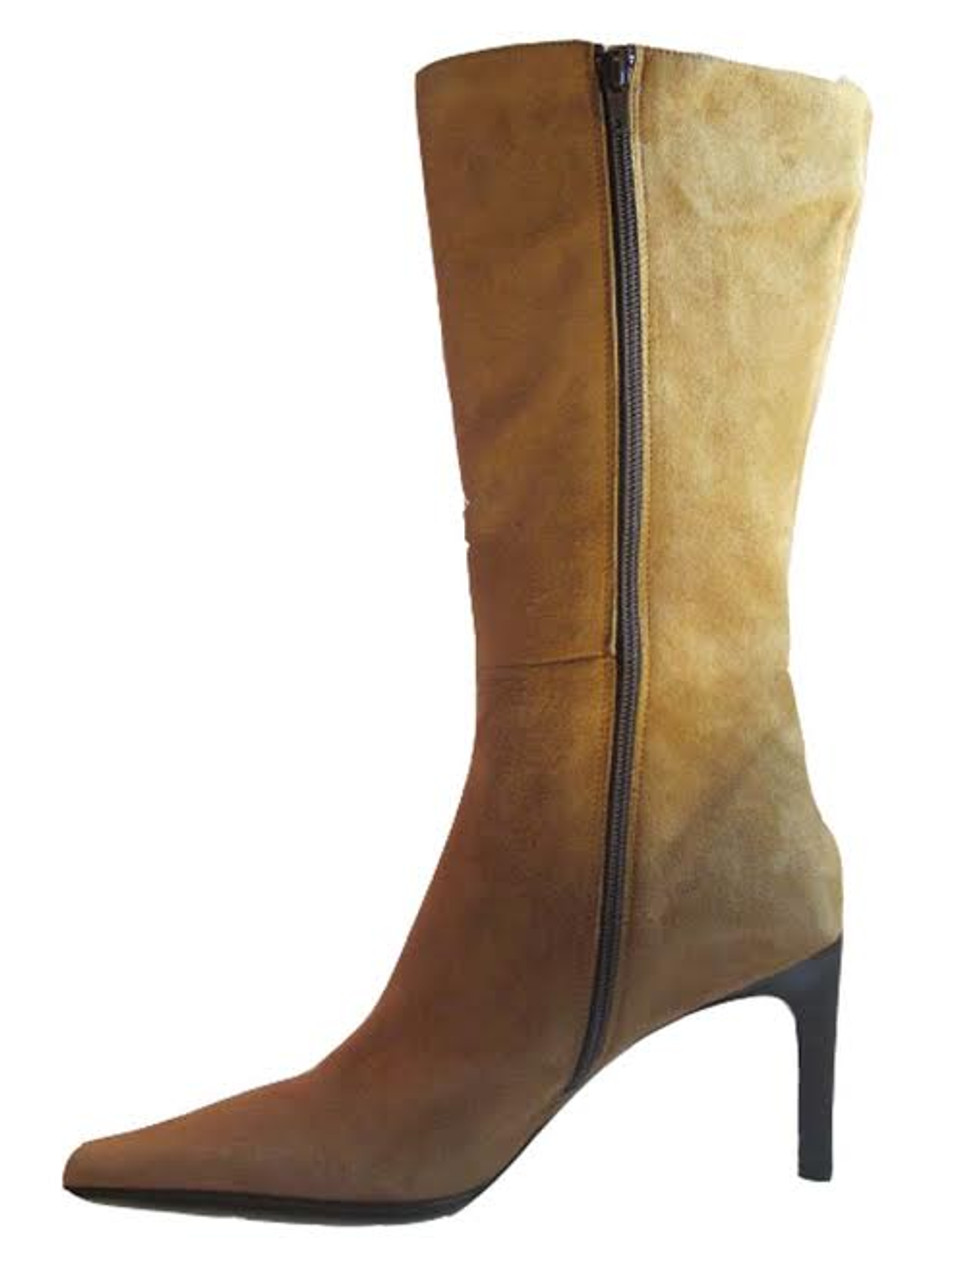 Paloma suede boots